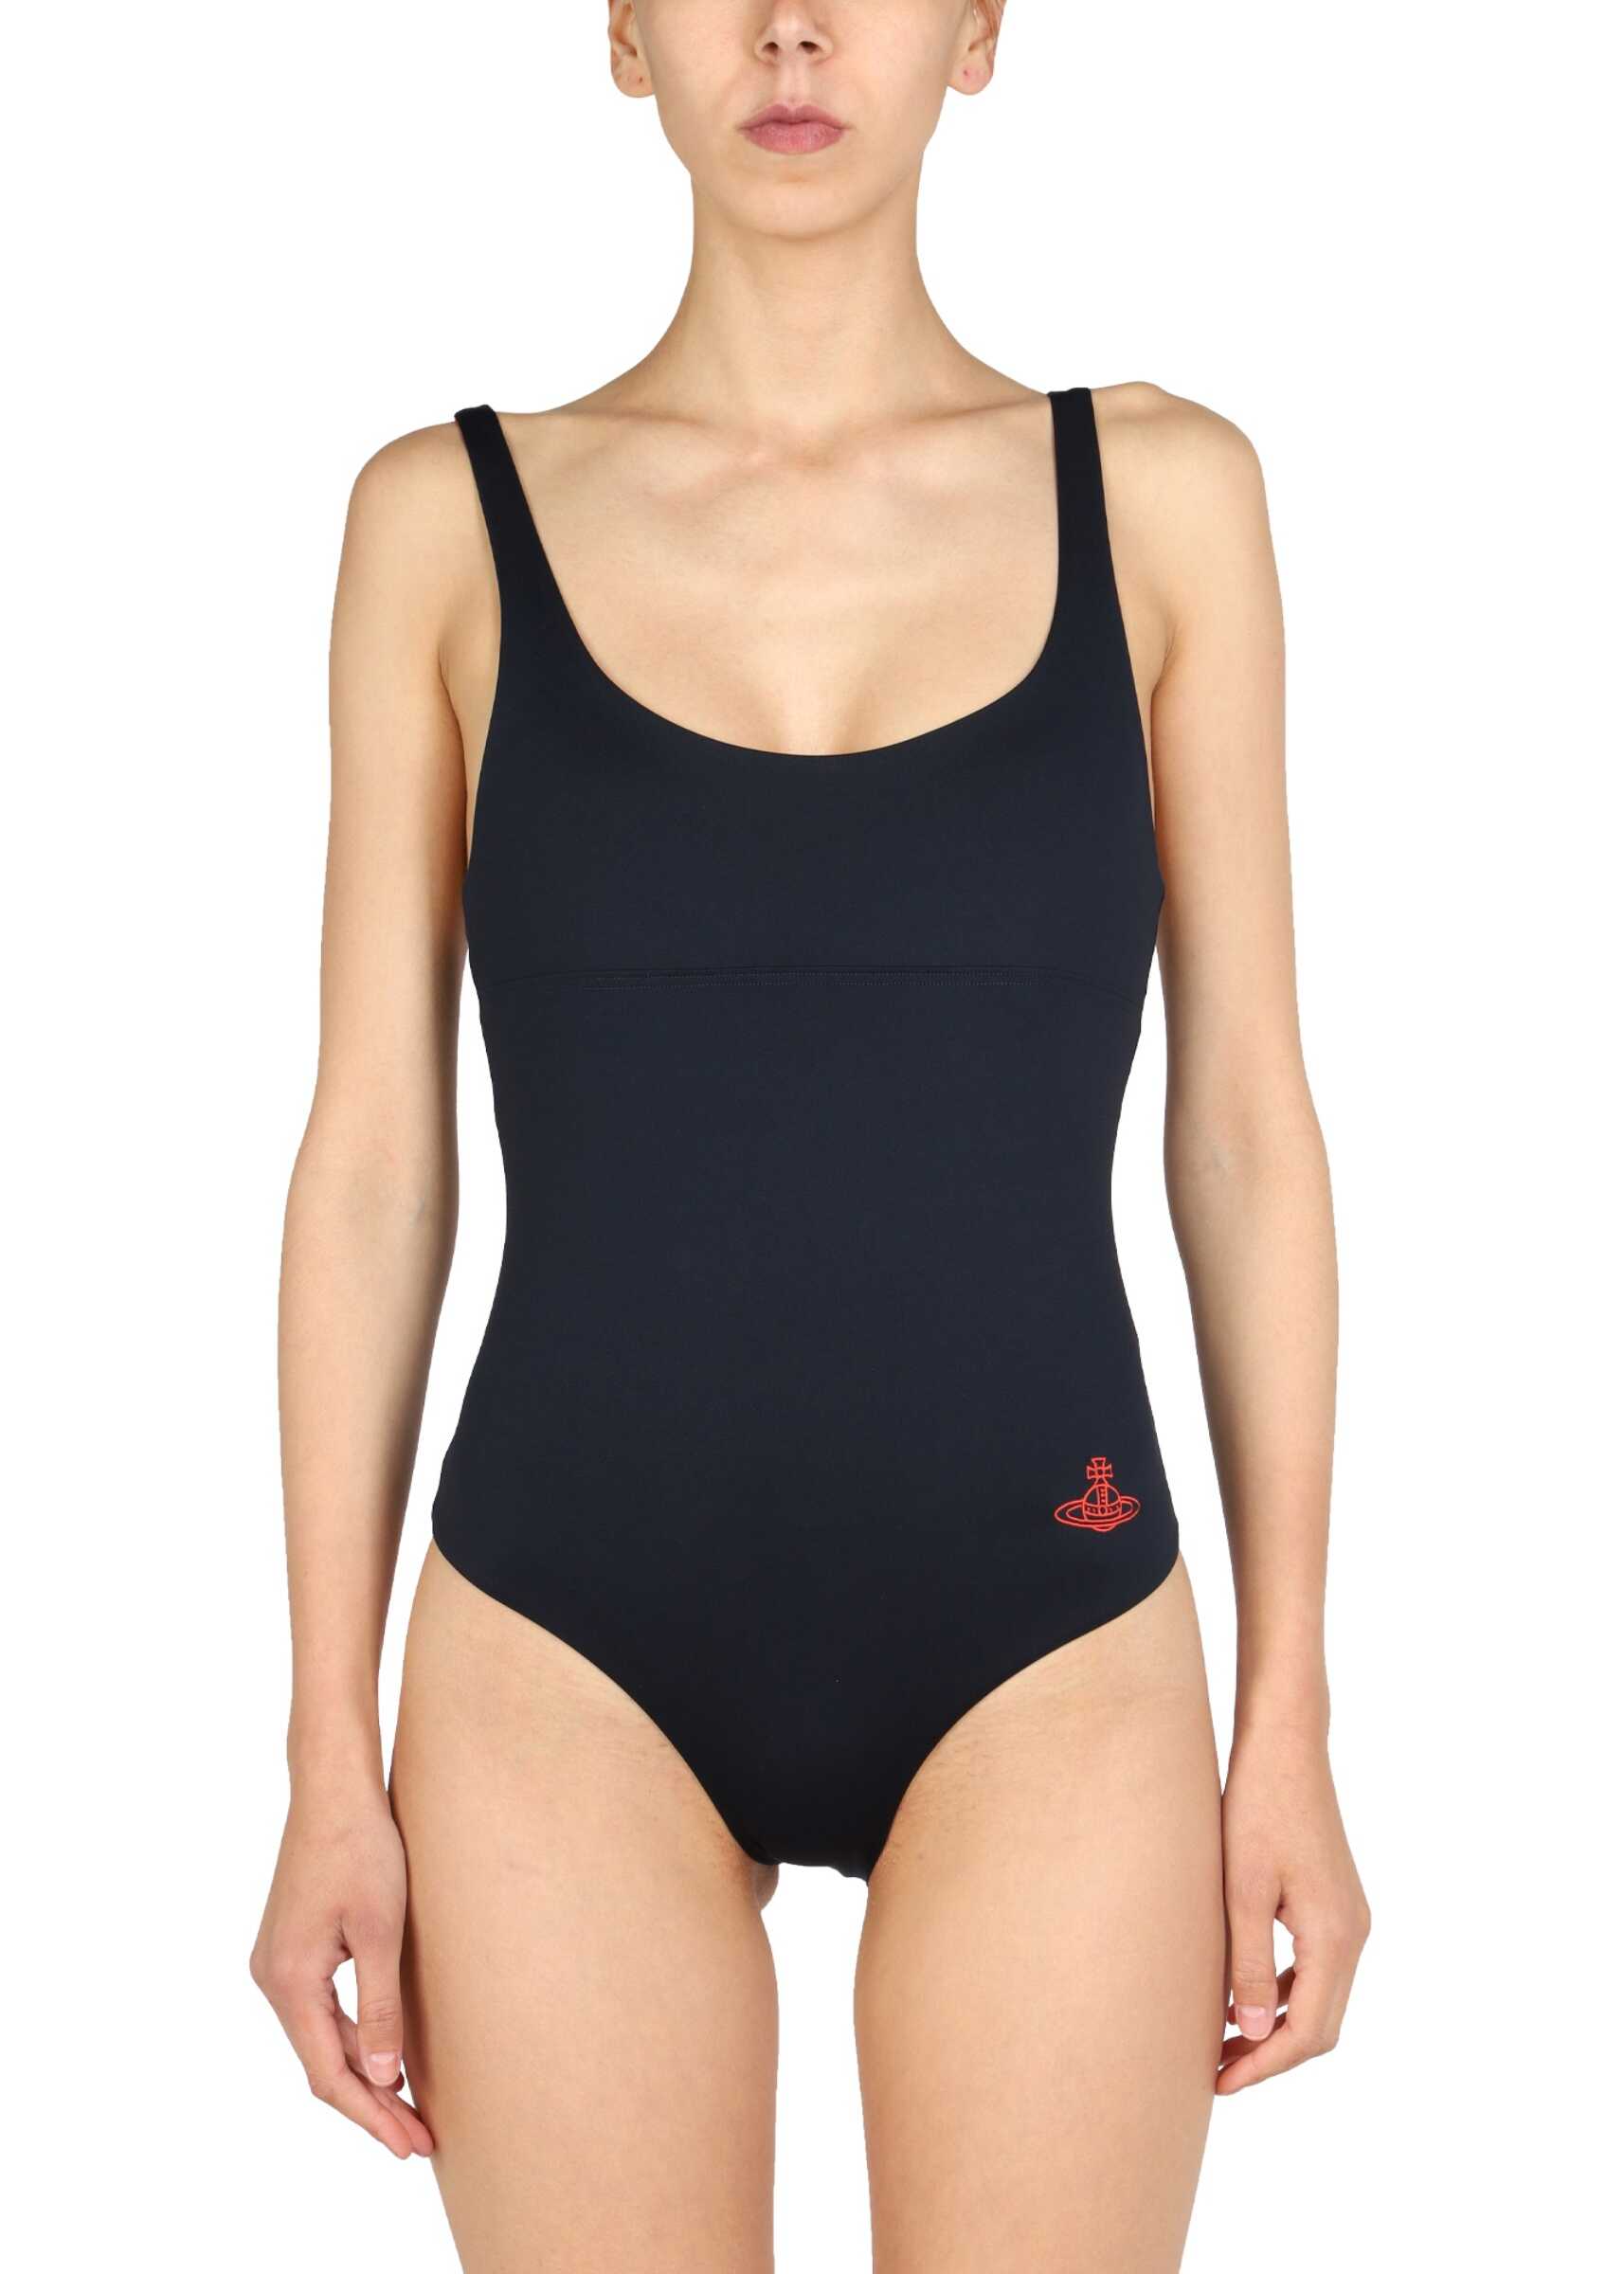 Vivienne Westwood One Piece Swimsuit With Orb Logo BLUE image0